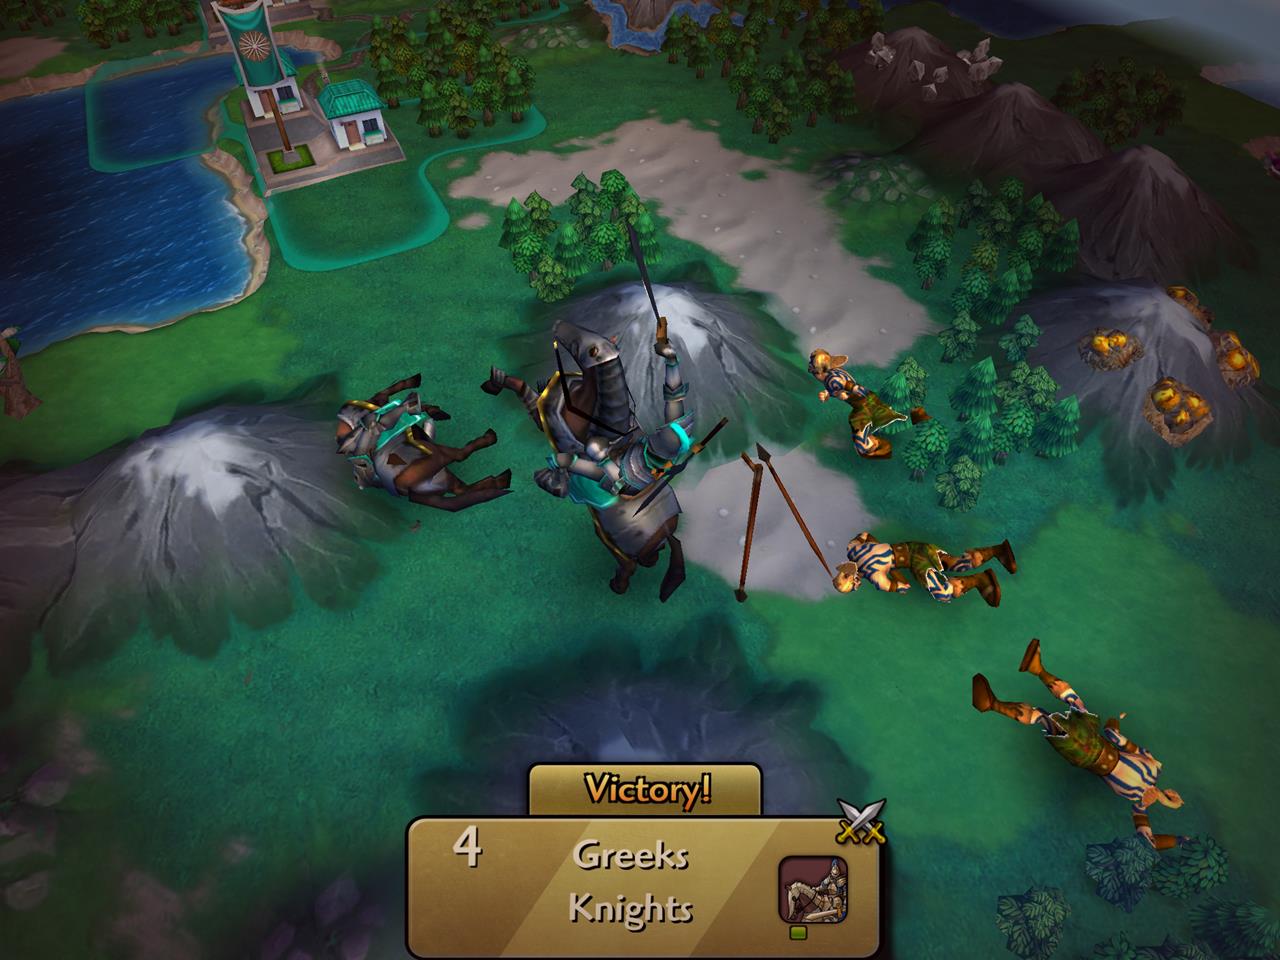 Image for Civilization Revolution 2 revealed, but you might not be able to play it for a while